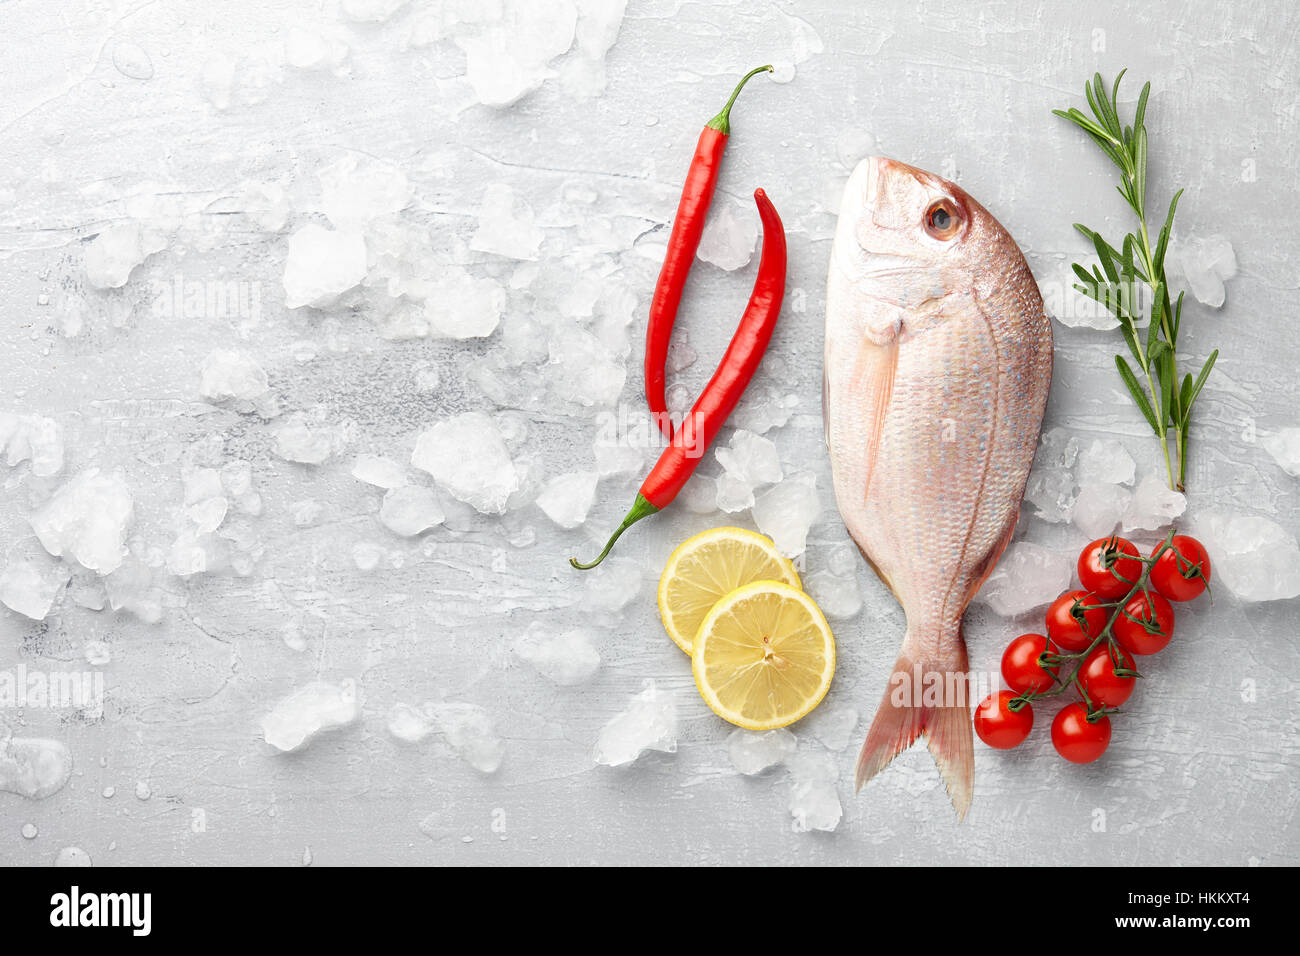 Fish cooking: fresh red Japanese seabream, lemon slices, chili pepper, cherry tomatoes and rosemary on gray stone background Stock Photo